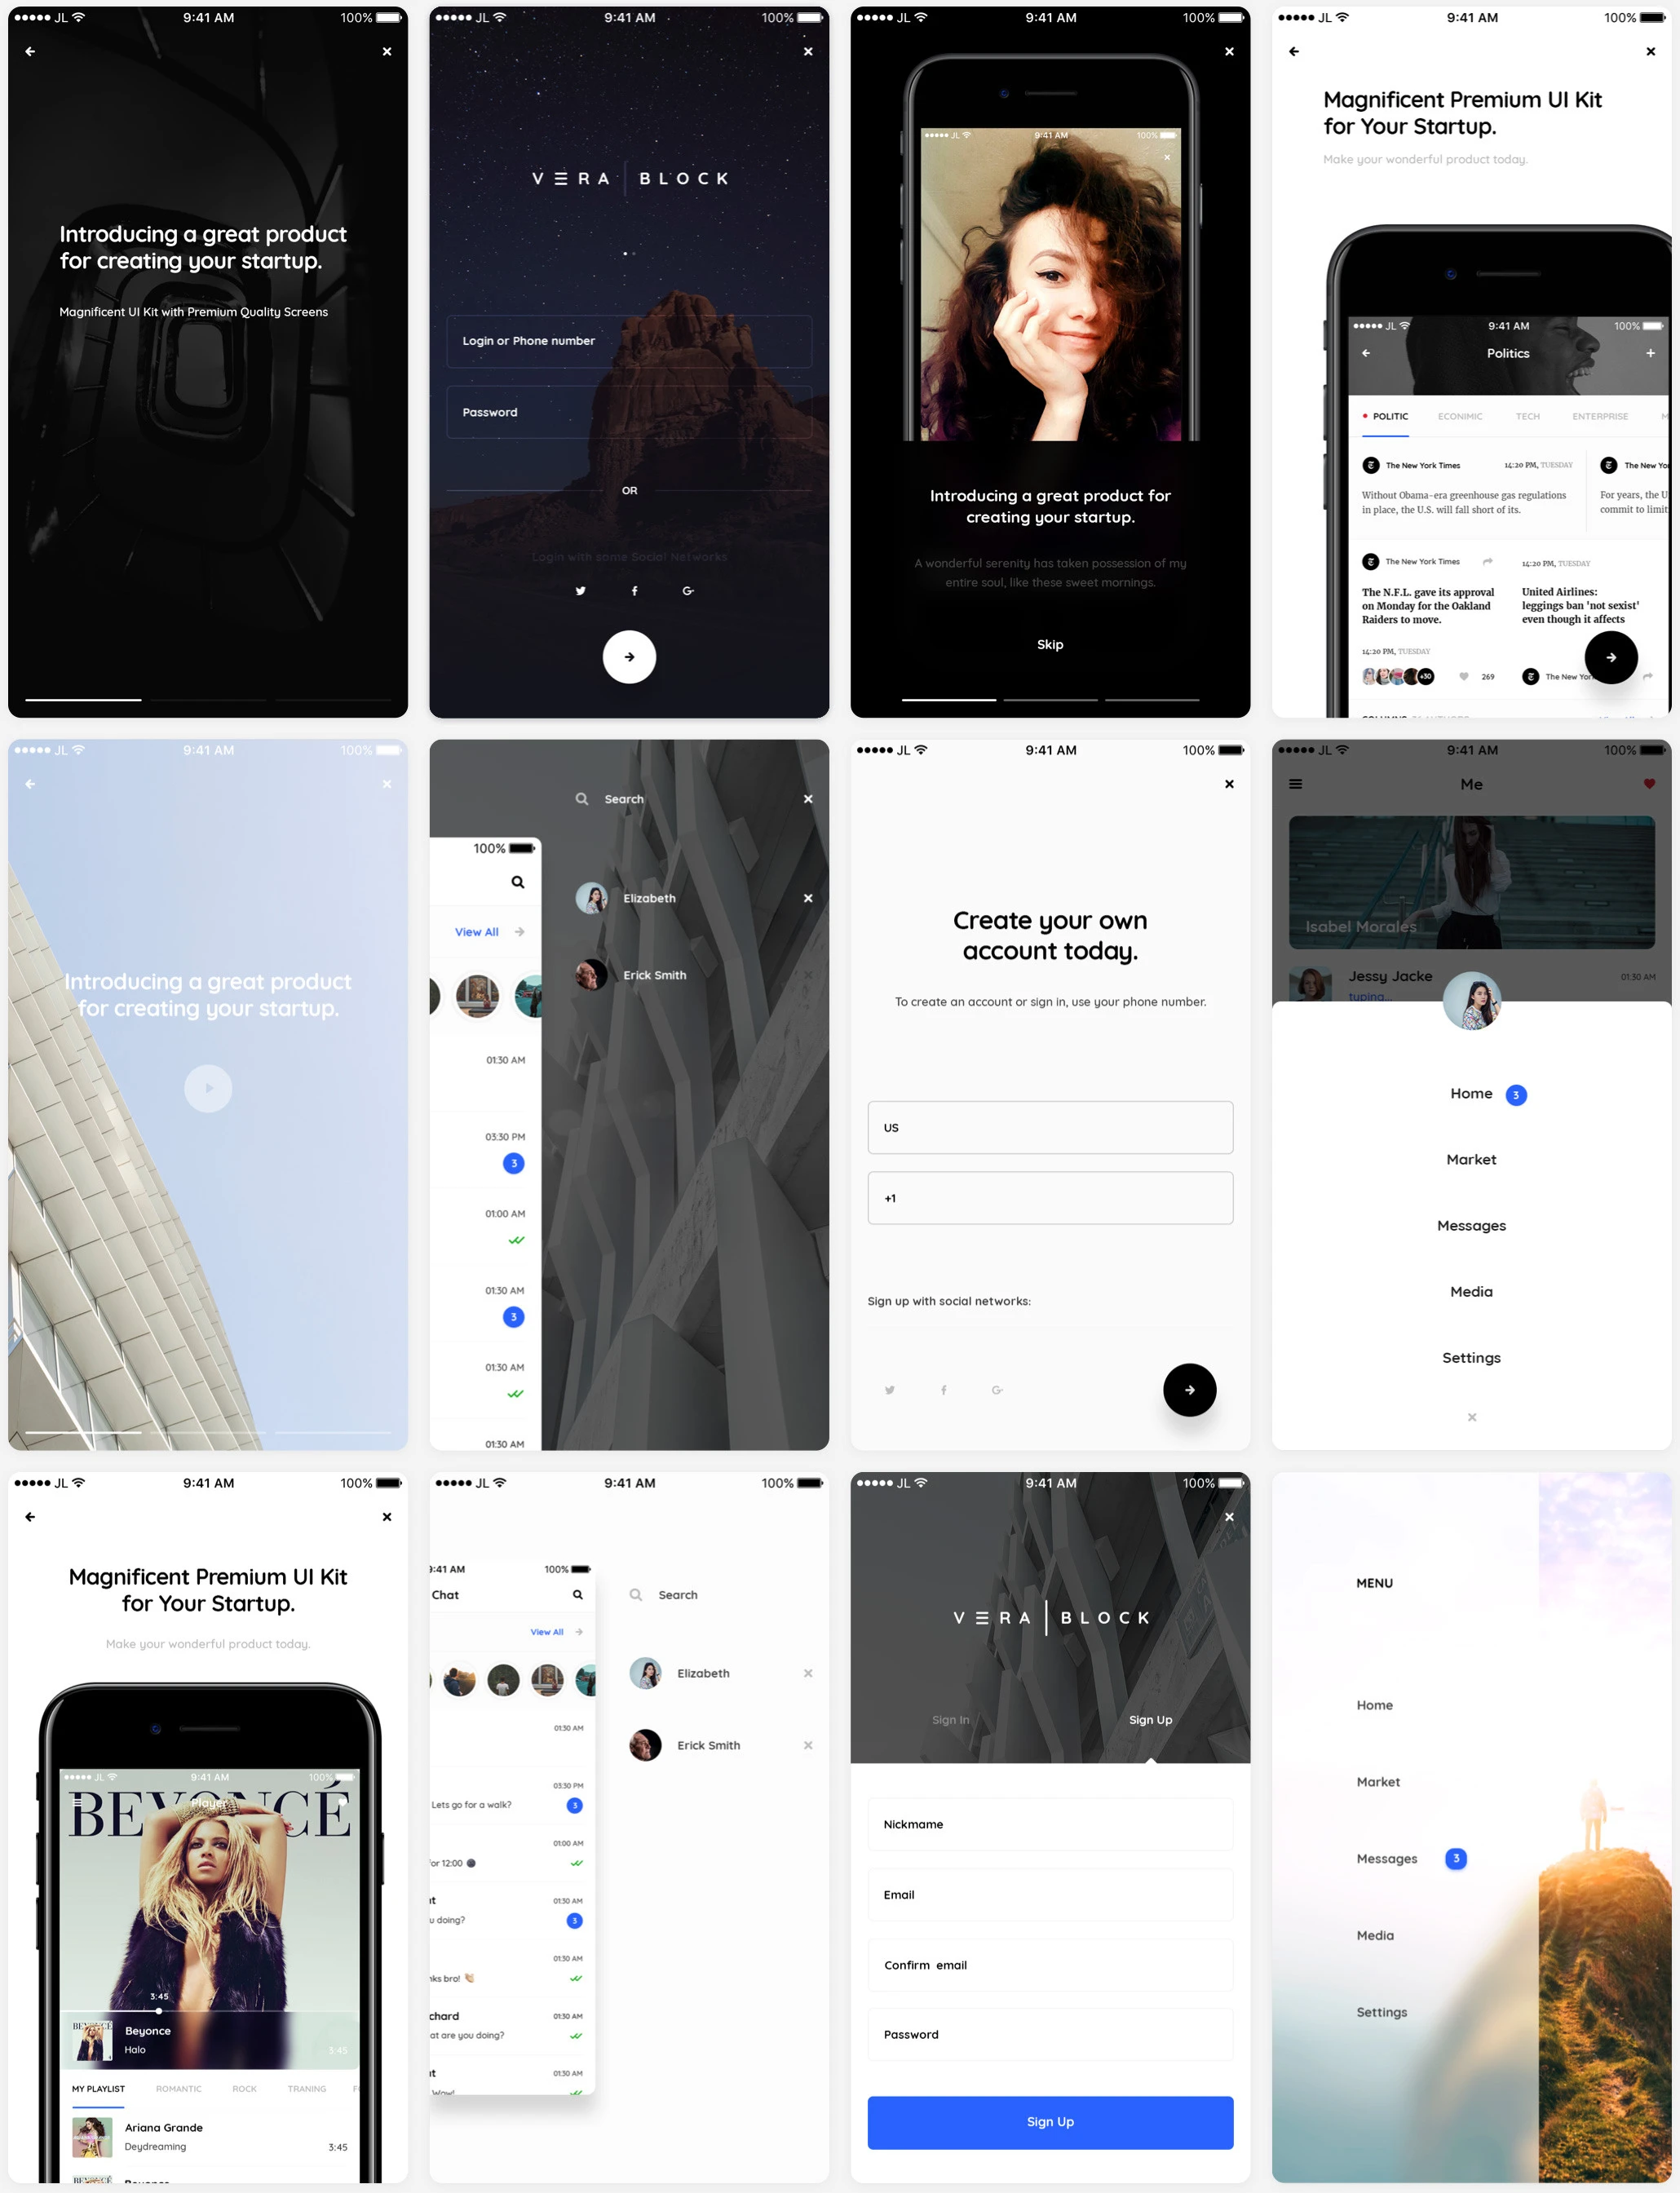 Vera Block Free UI Kit - Vera Block is a huge collection of mobile screens and components with trendy design. Each screen and component is made carefully and easily customized for any project. This product will speed up your work in mobile design.